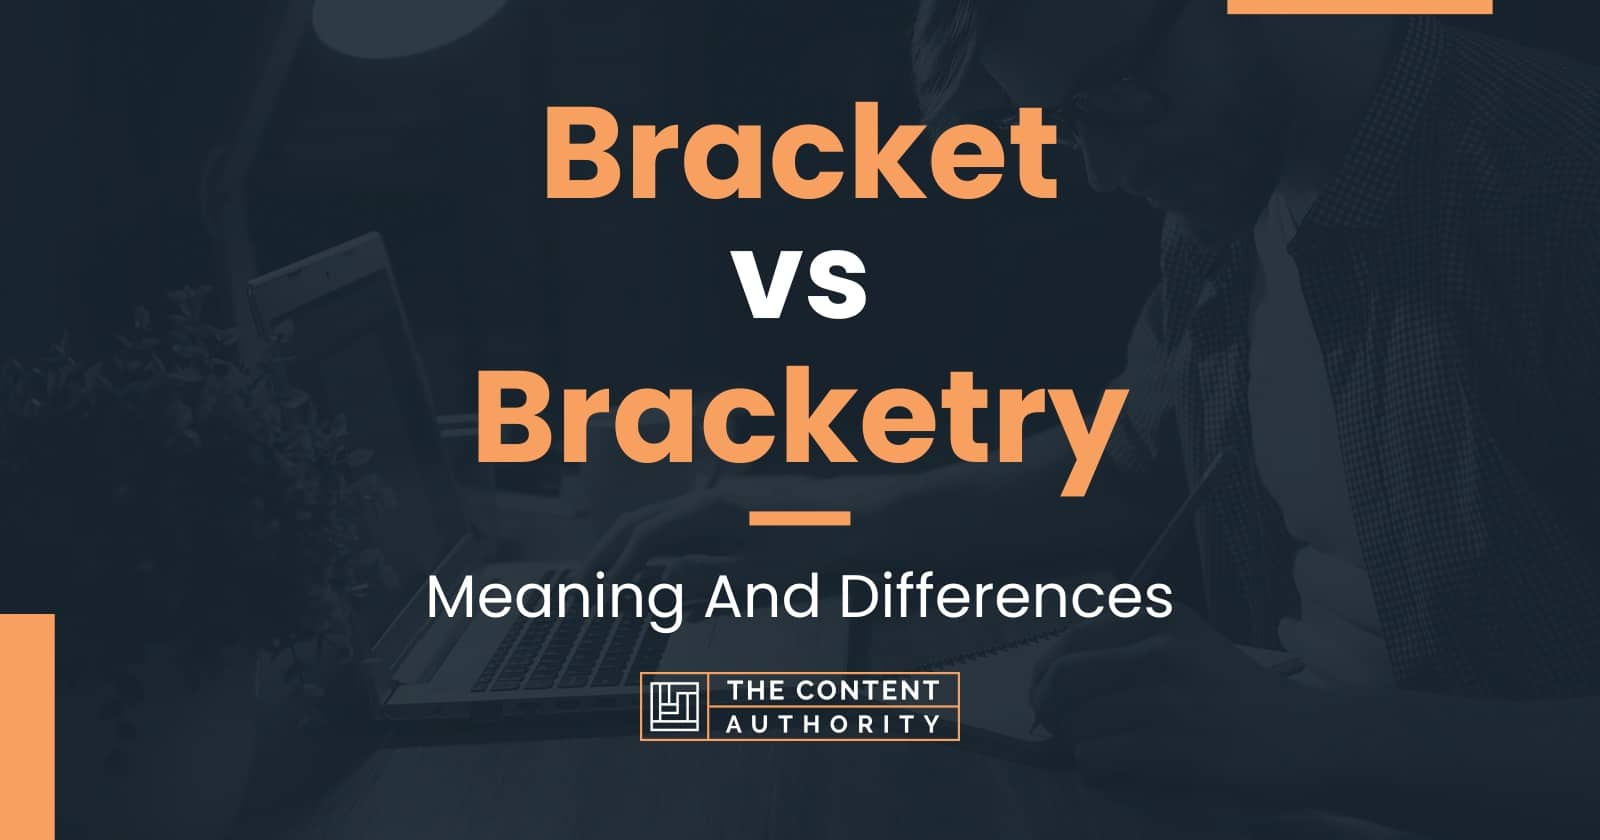 bracket-vs-bracketry-meaning-and-differences